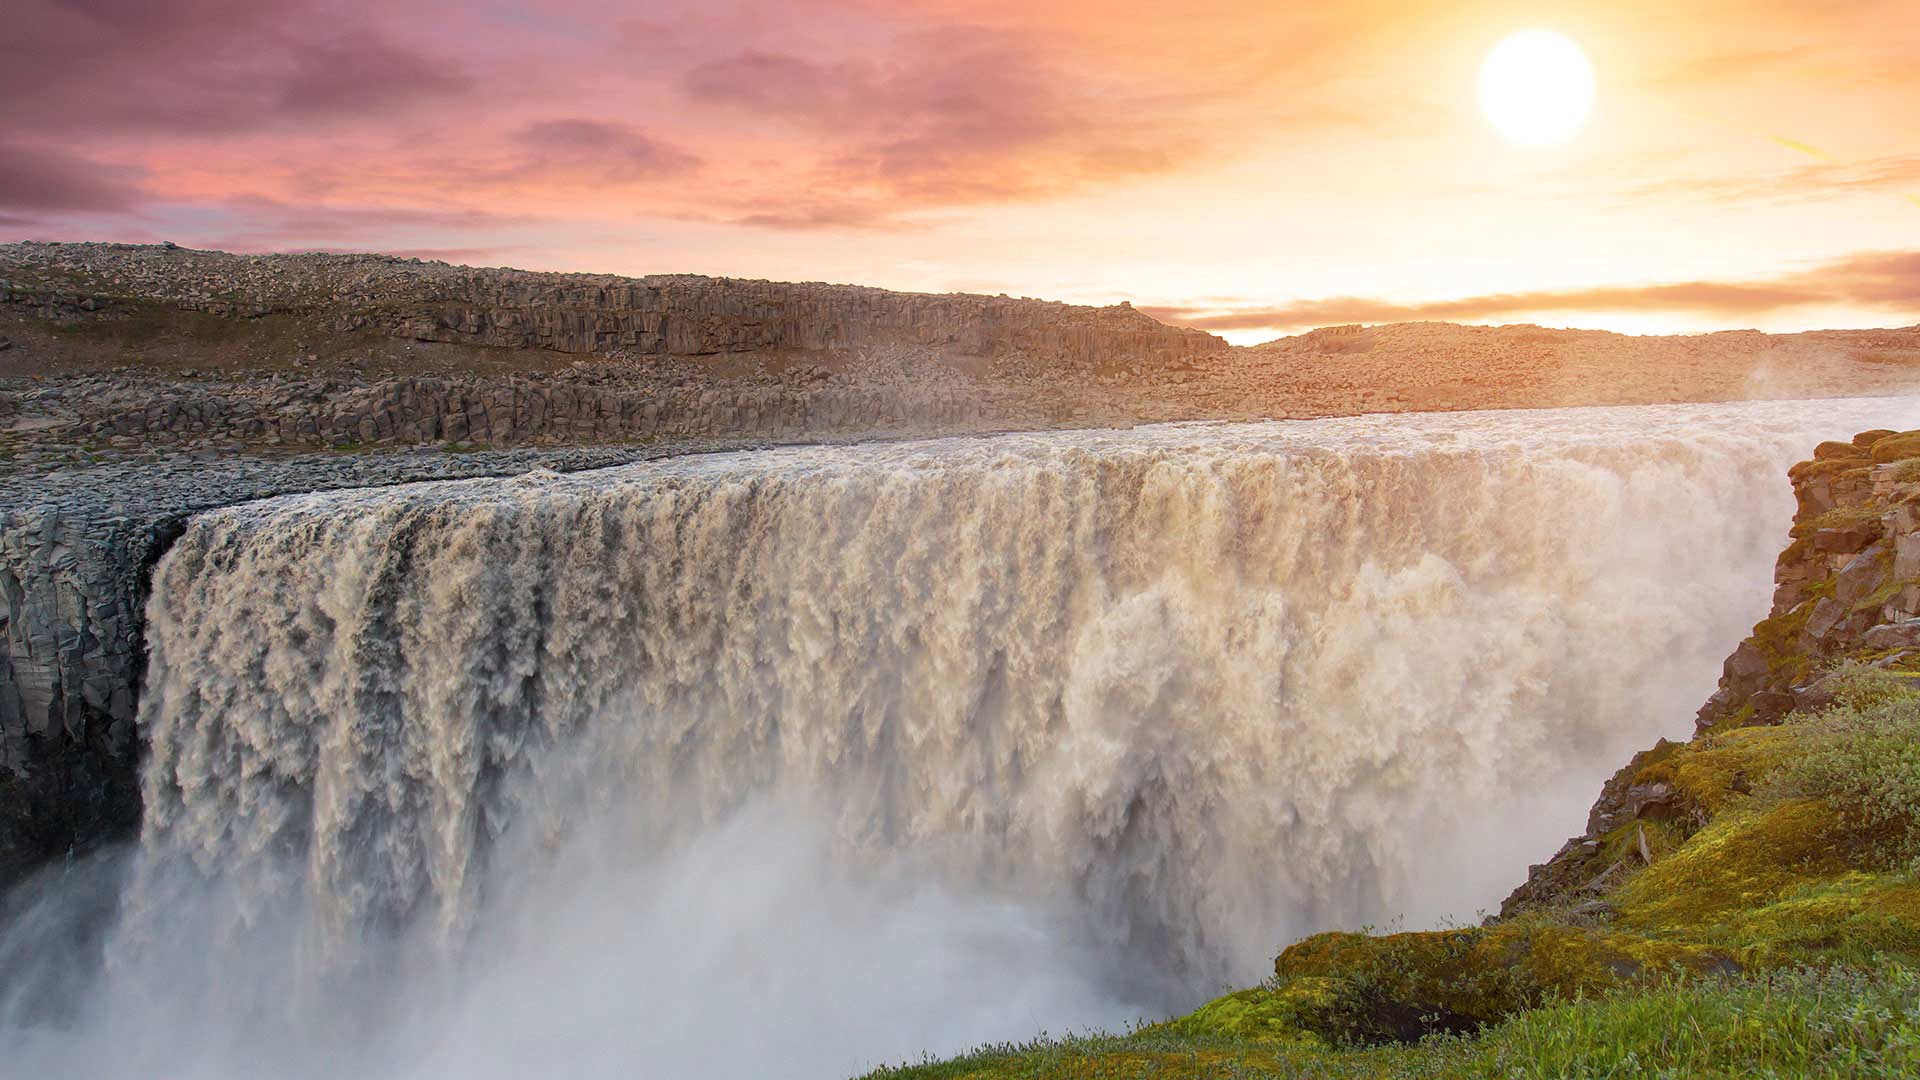 The Dettifoss waterfall at sunset